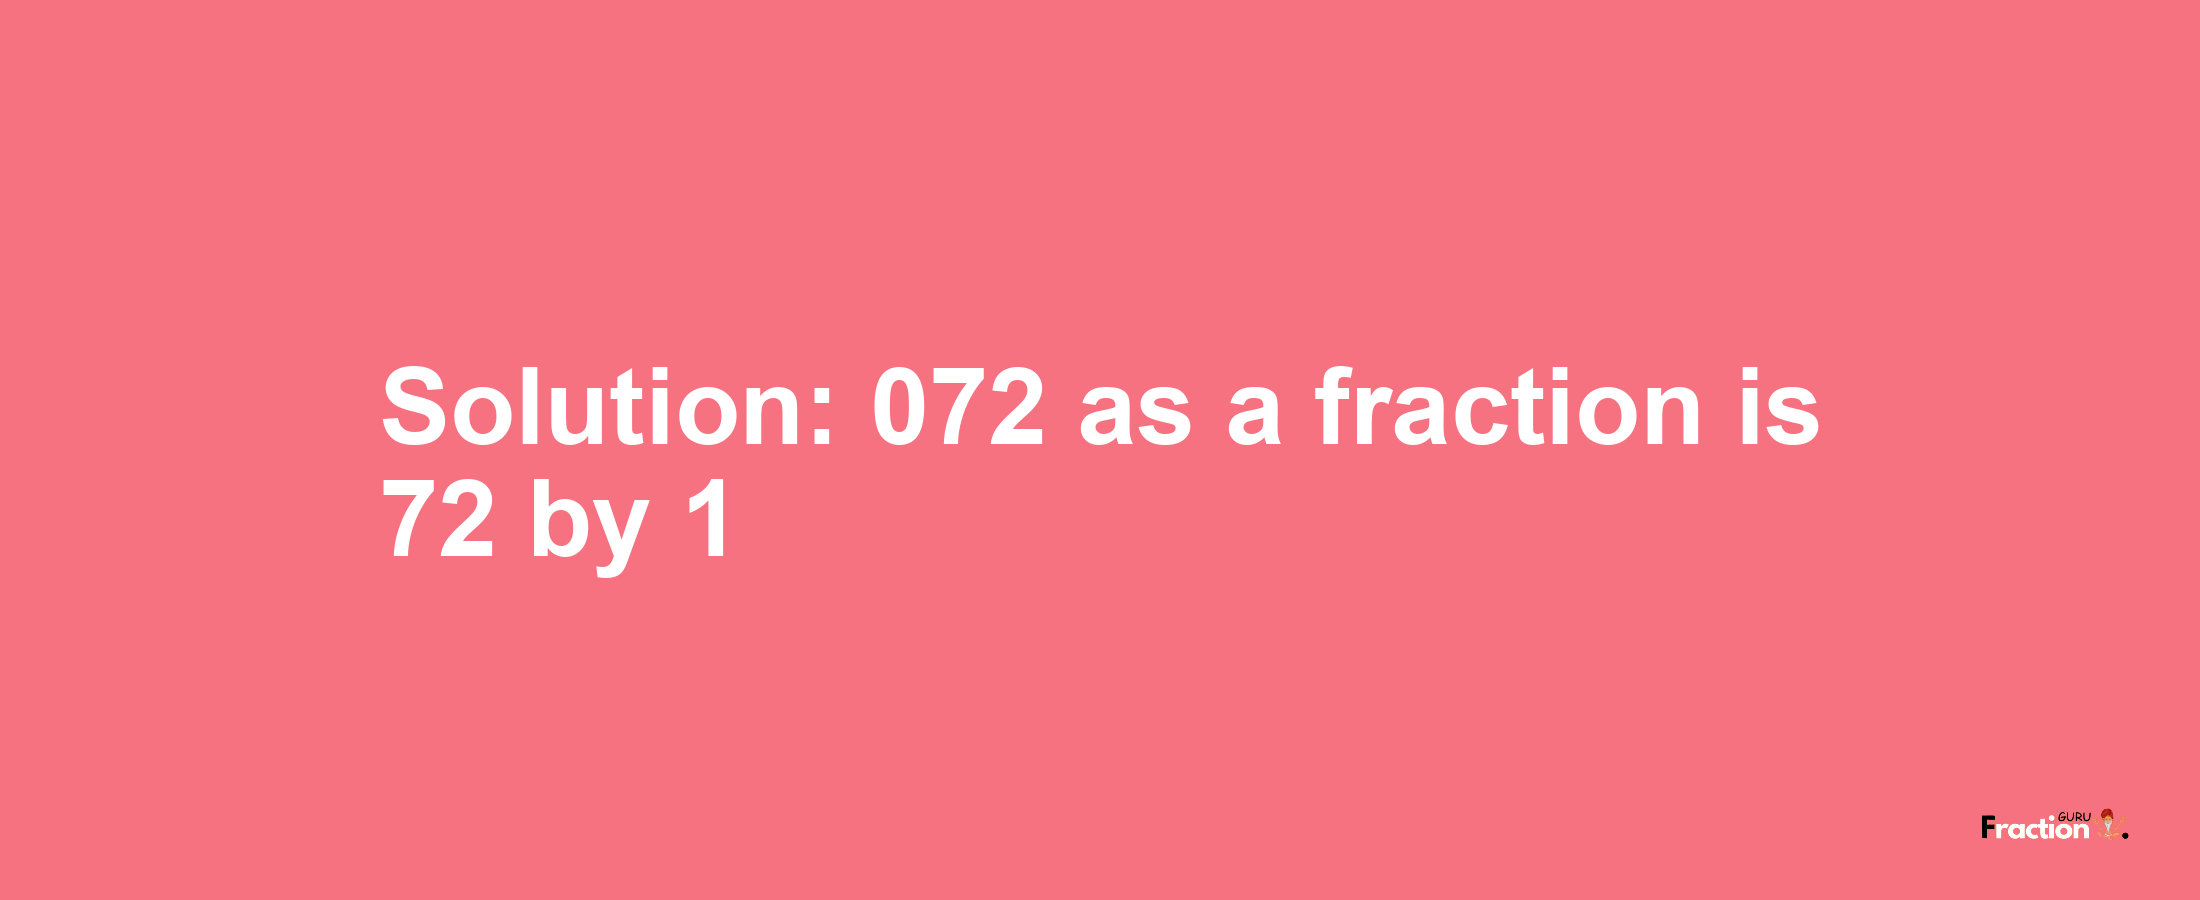 Solution:072 as a fraction is 72/1